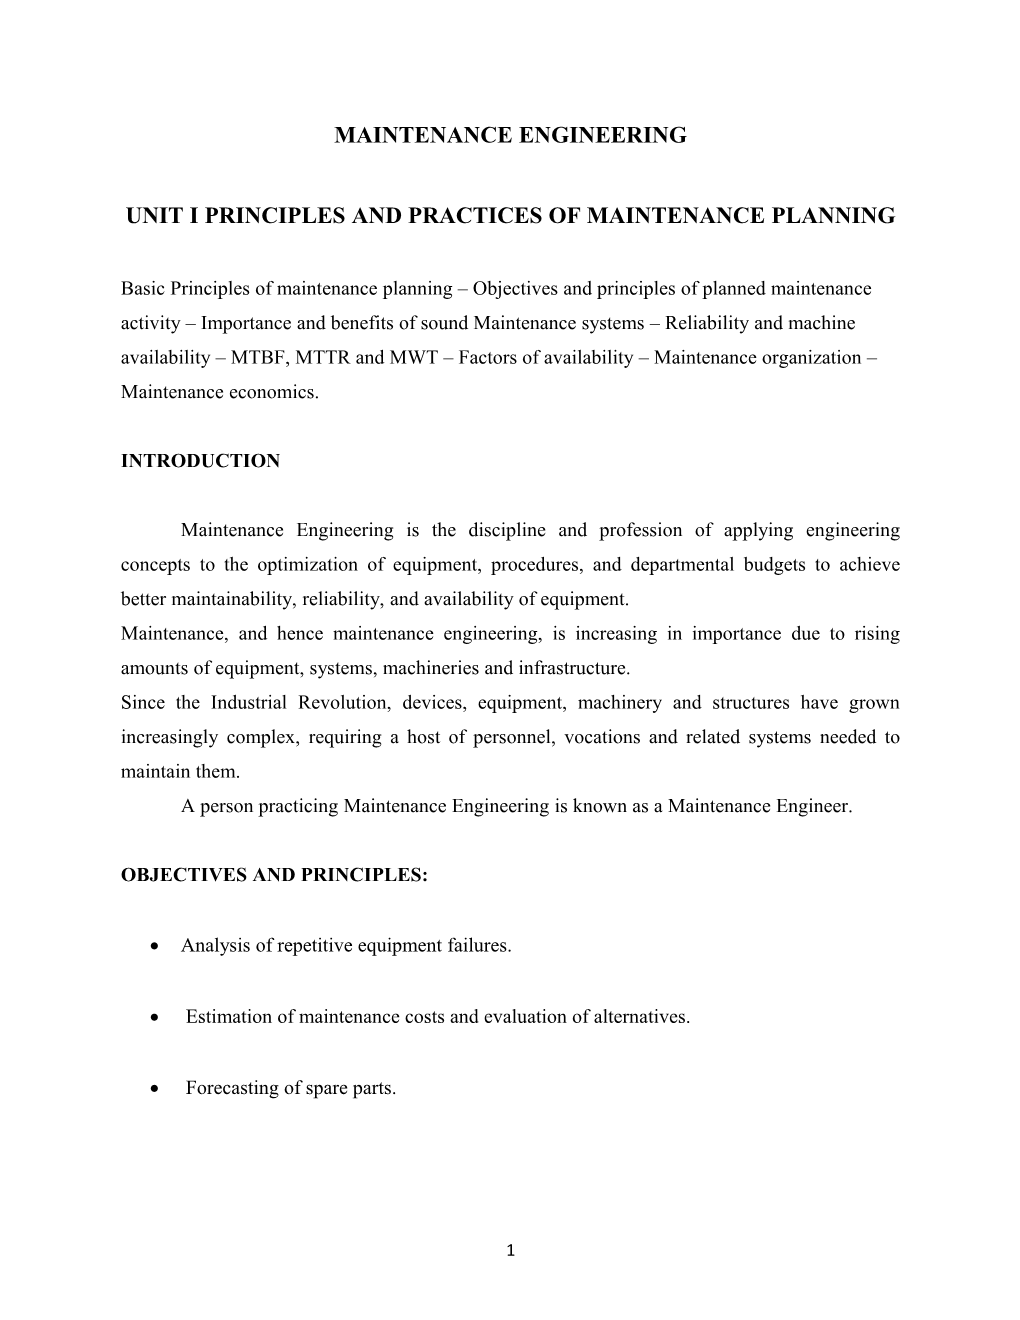 Unit I Principles and Practices of Maintenance Planning